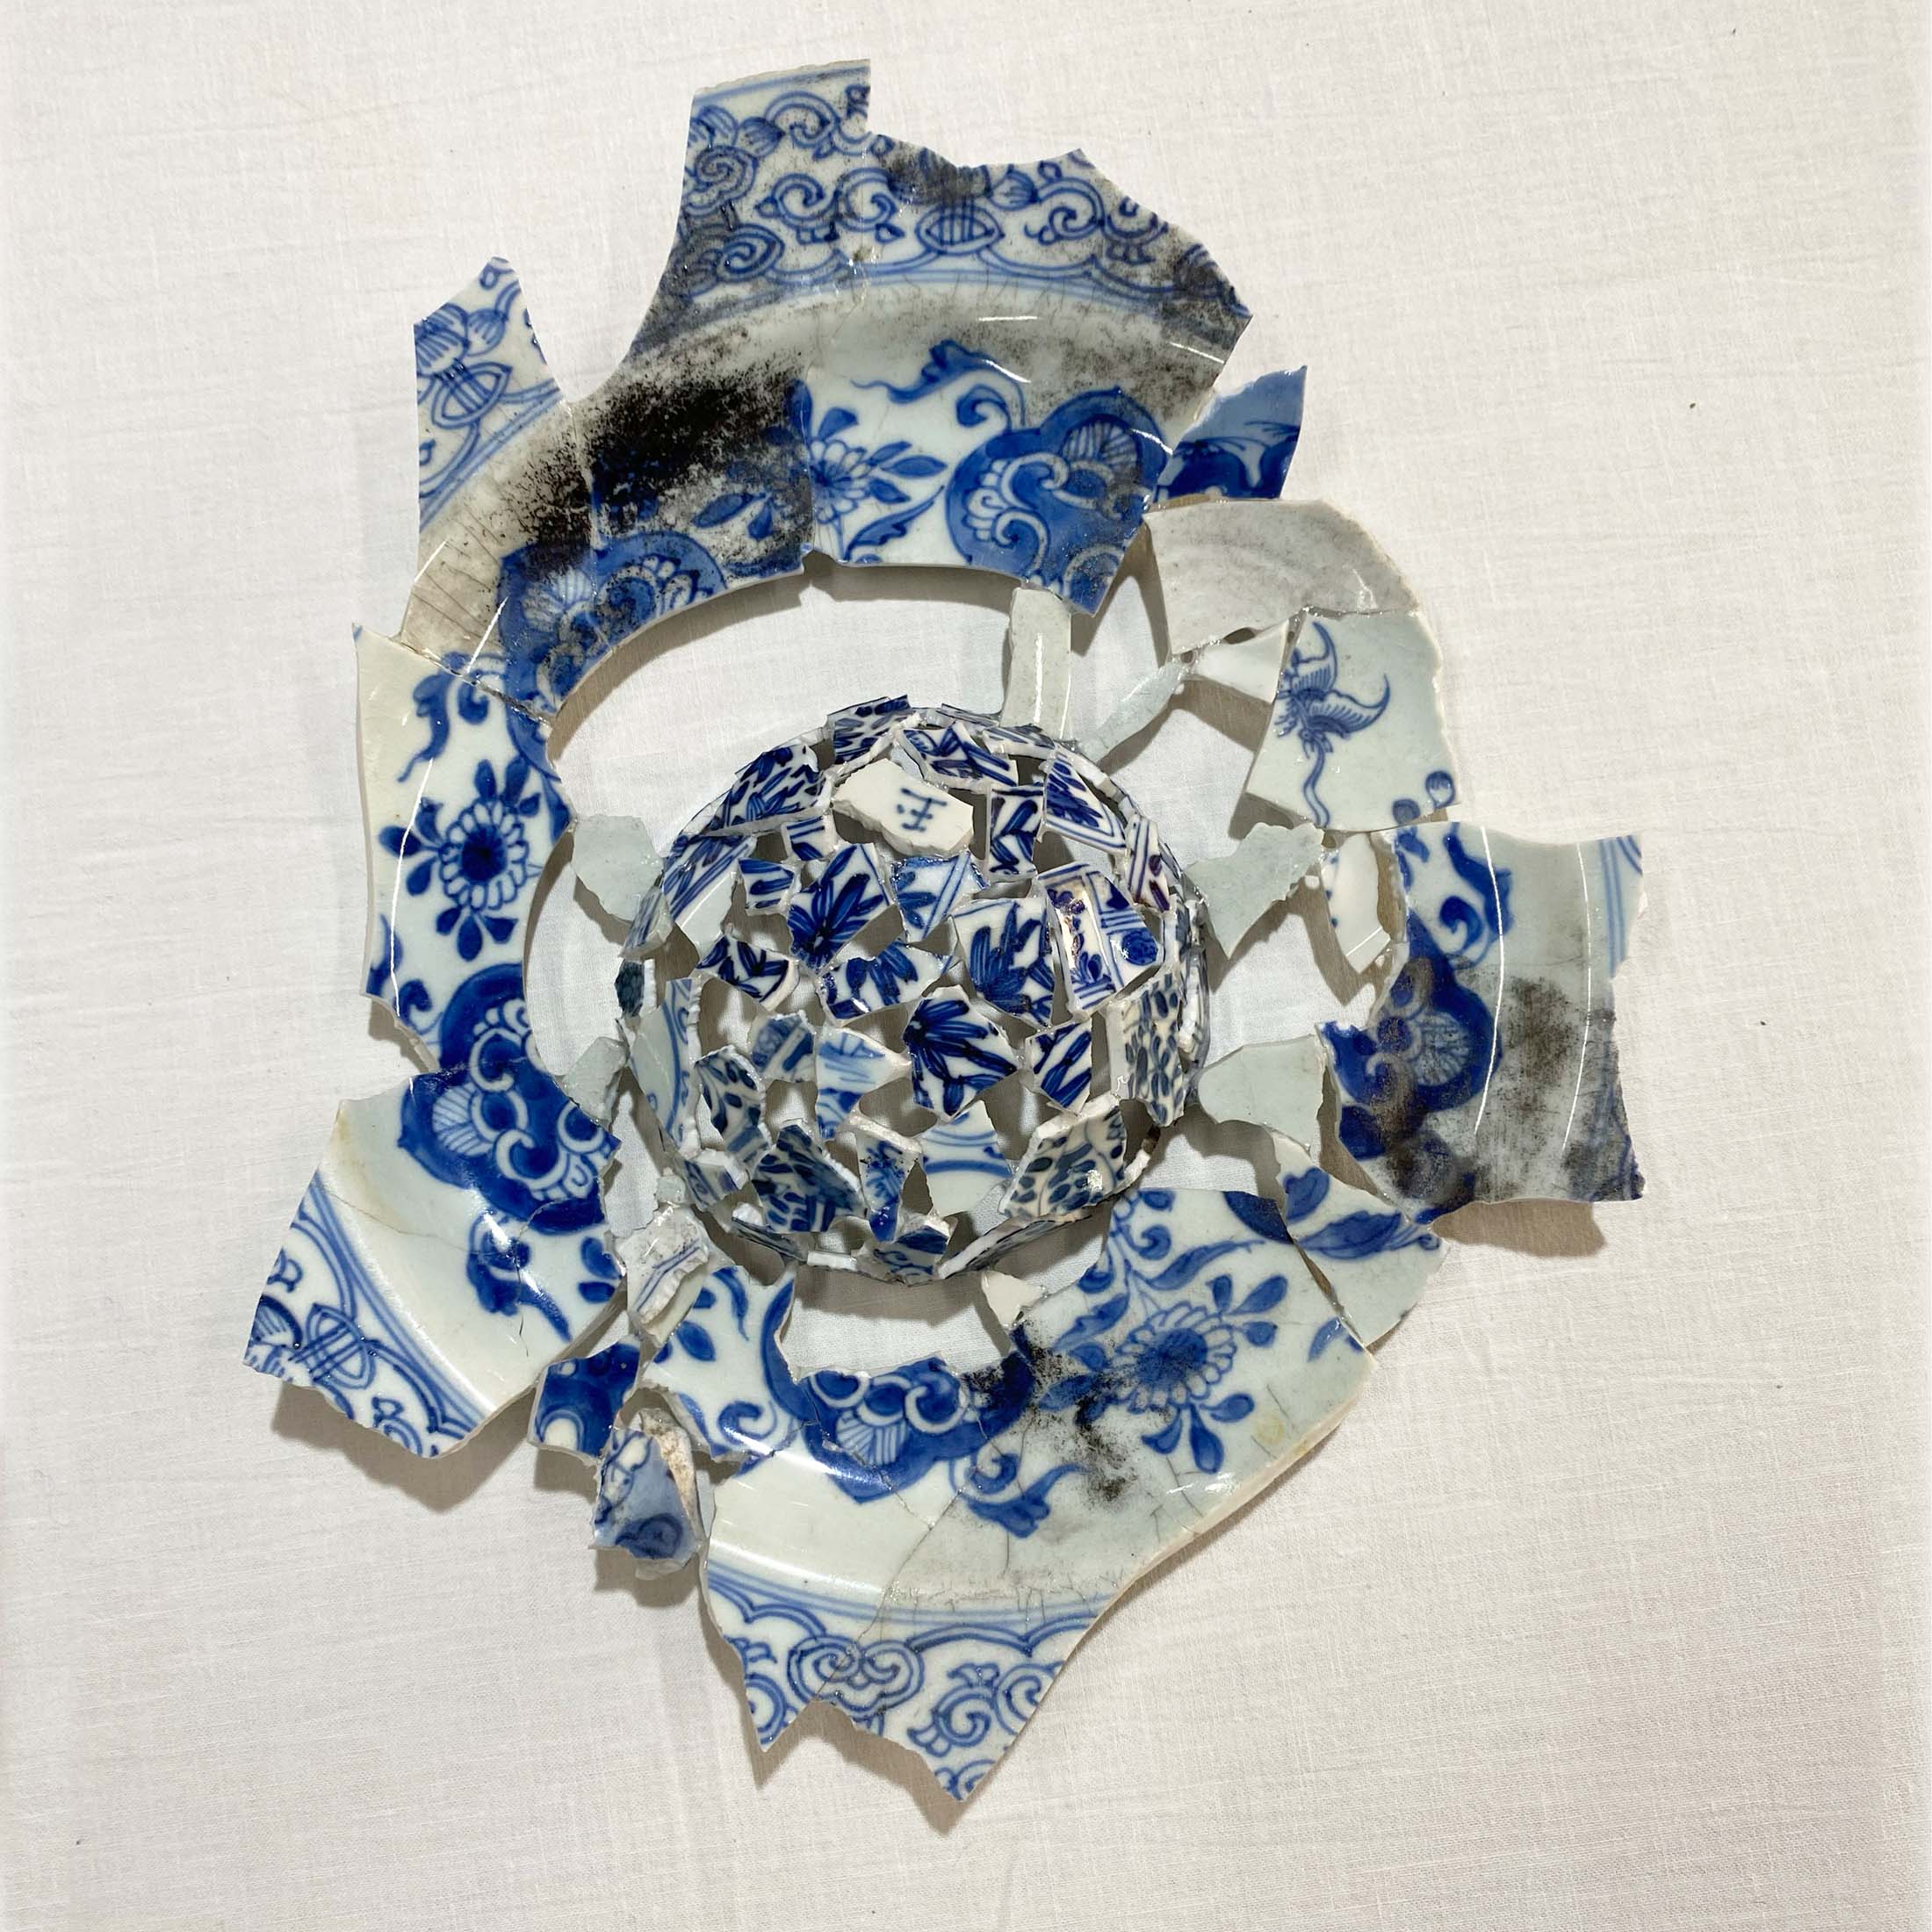 Mixed media piece 'Mirror Mirror' from Tamlin Blake's 'After the Fire' exhibition, composed of blue and white ceramic shards, inviting viewers to reflect on the craftsmanship in art and its enduring narrative."